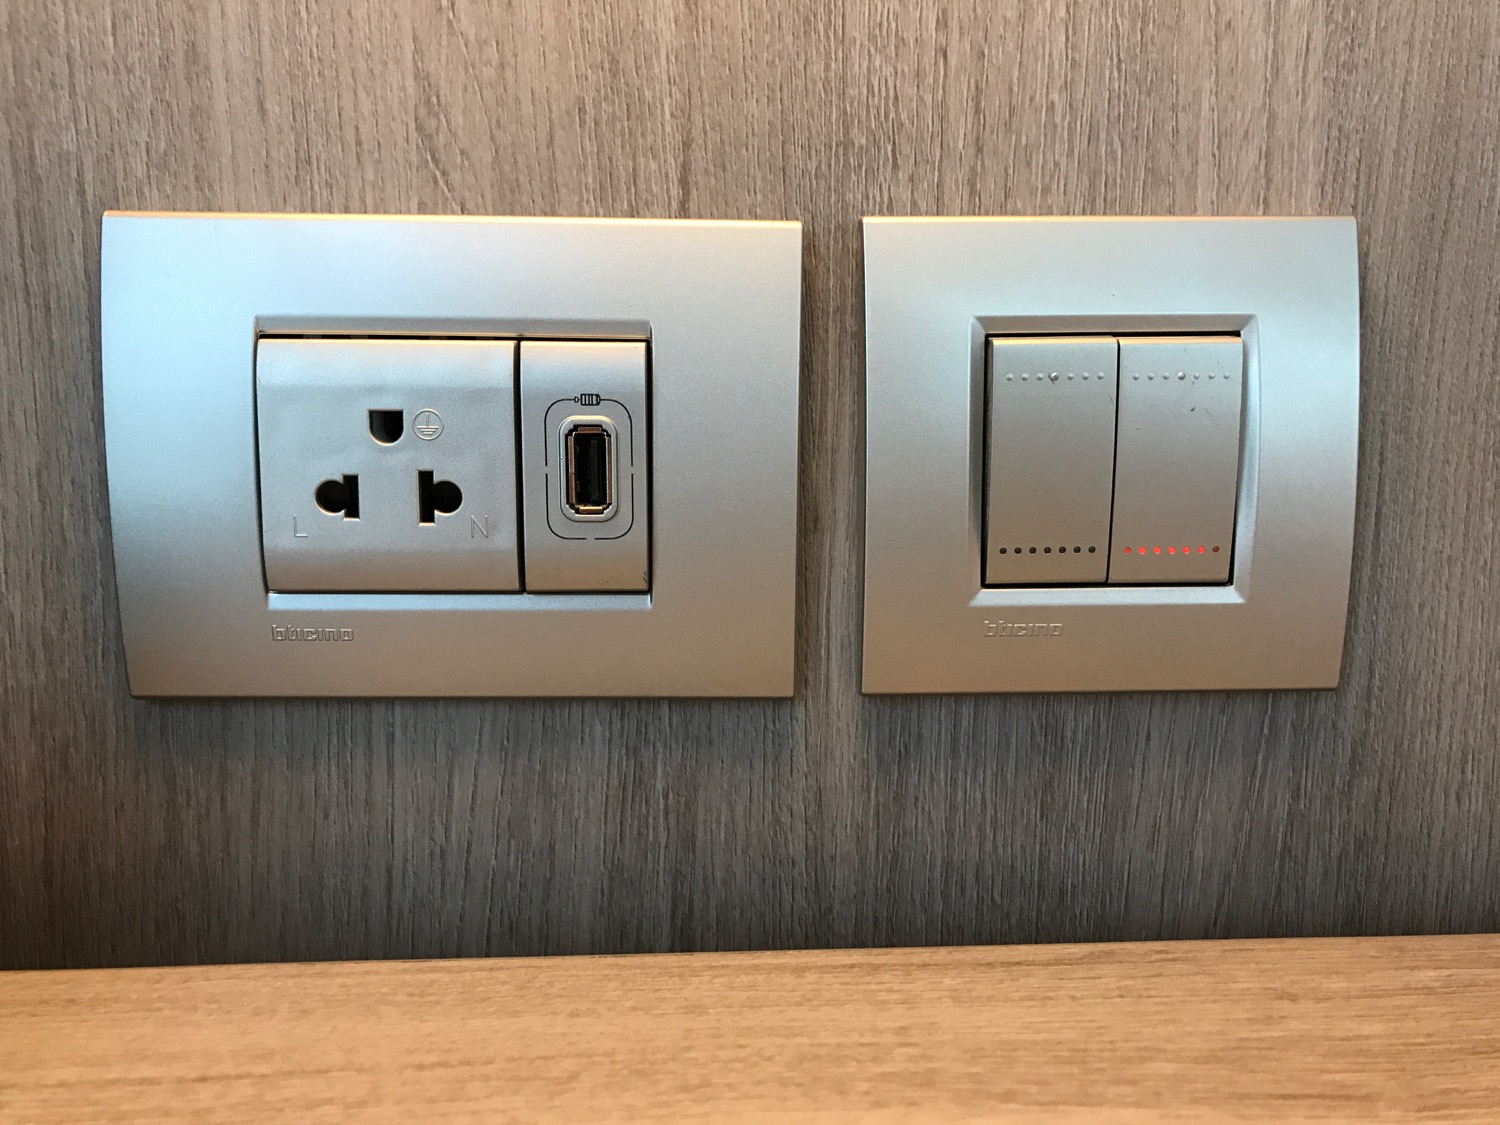 a wall outlet with a usb port and a usb port